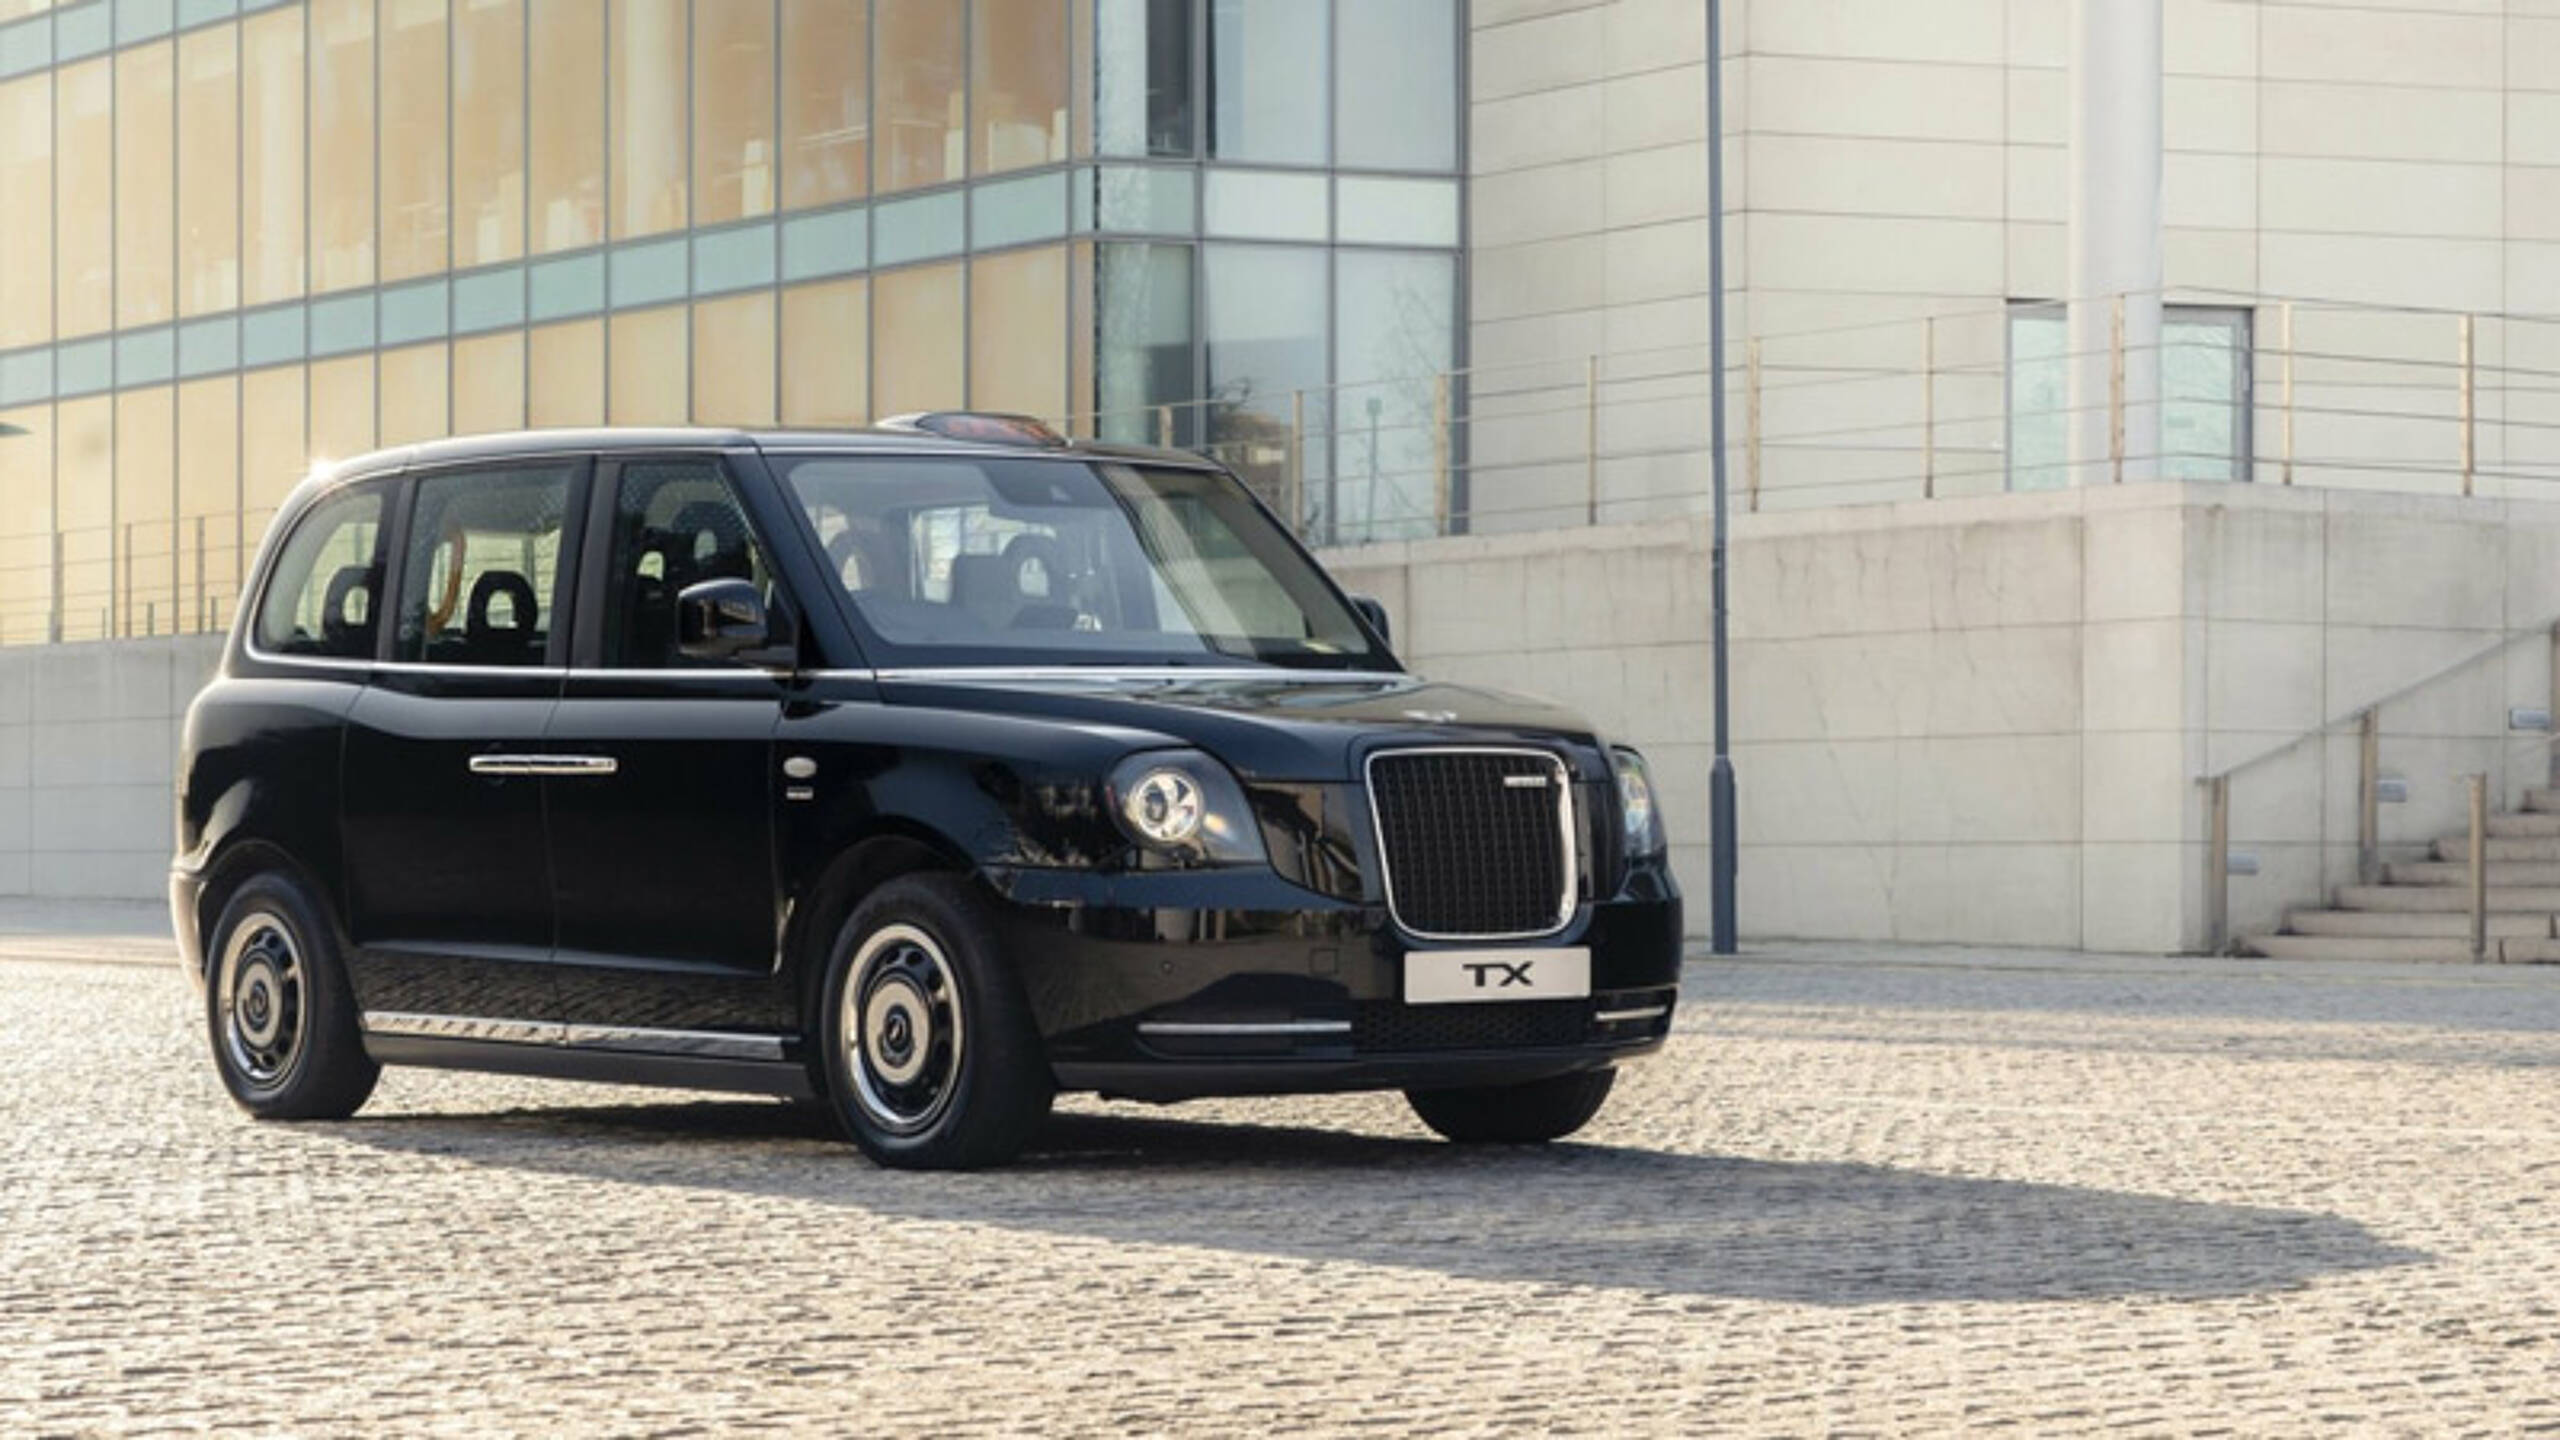 London bans new taxis that are not zero-emission capable